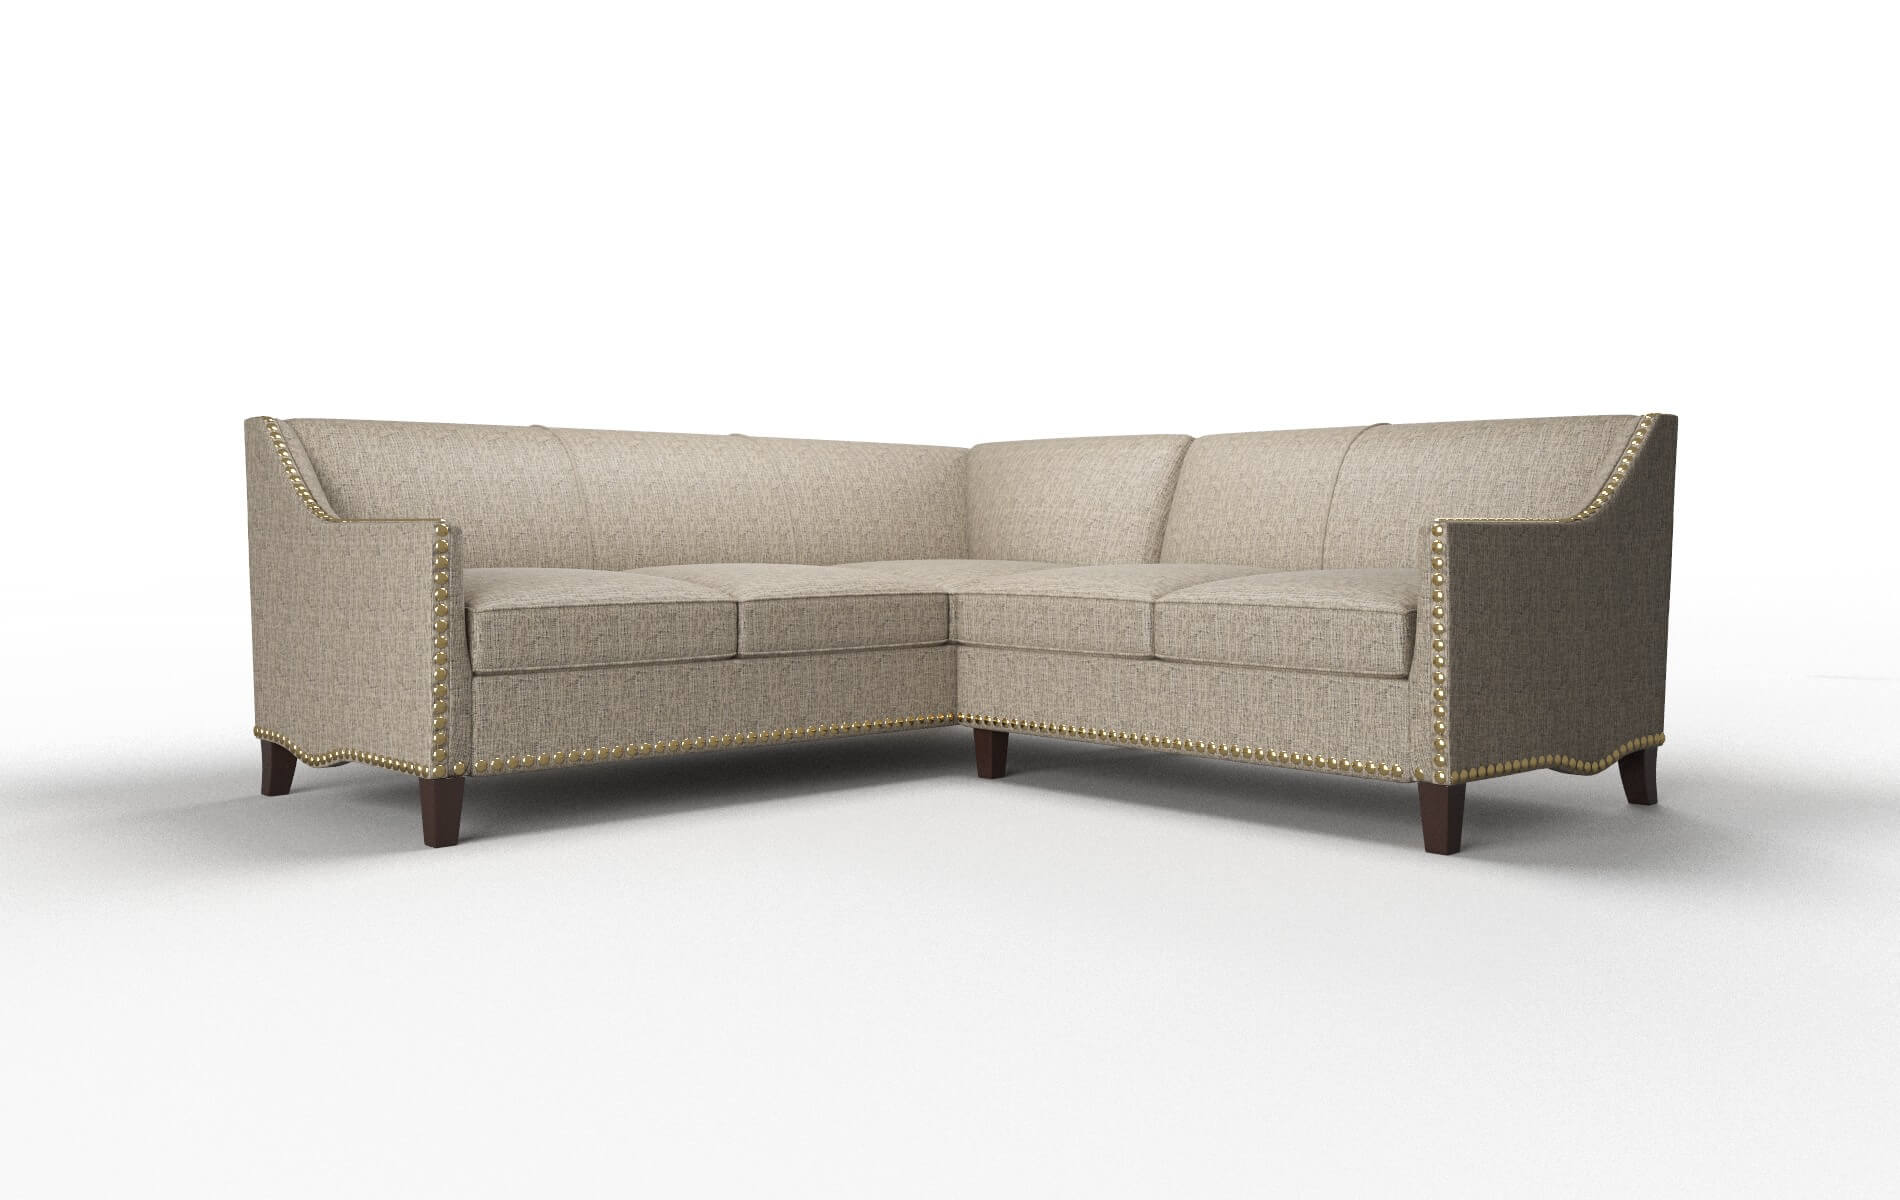 Amsterdam Solifestyle 51 Sectional espresso legs